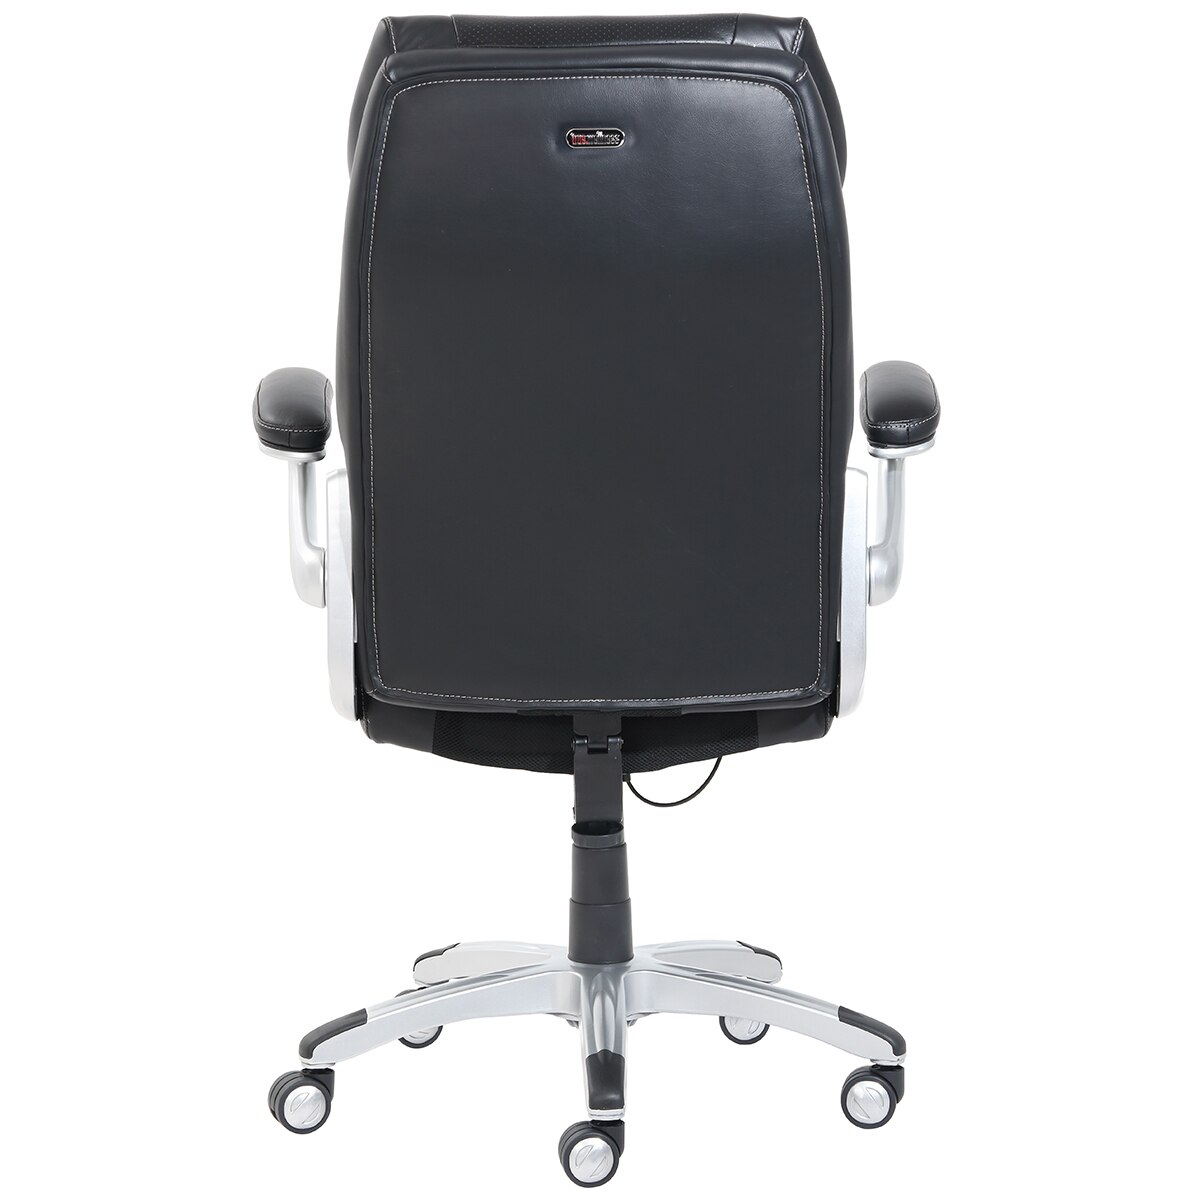 True Innovations Manager Chair | Costco Australia